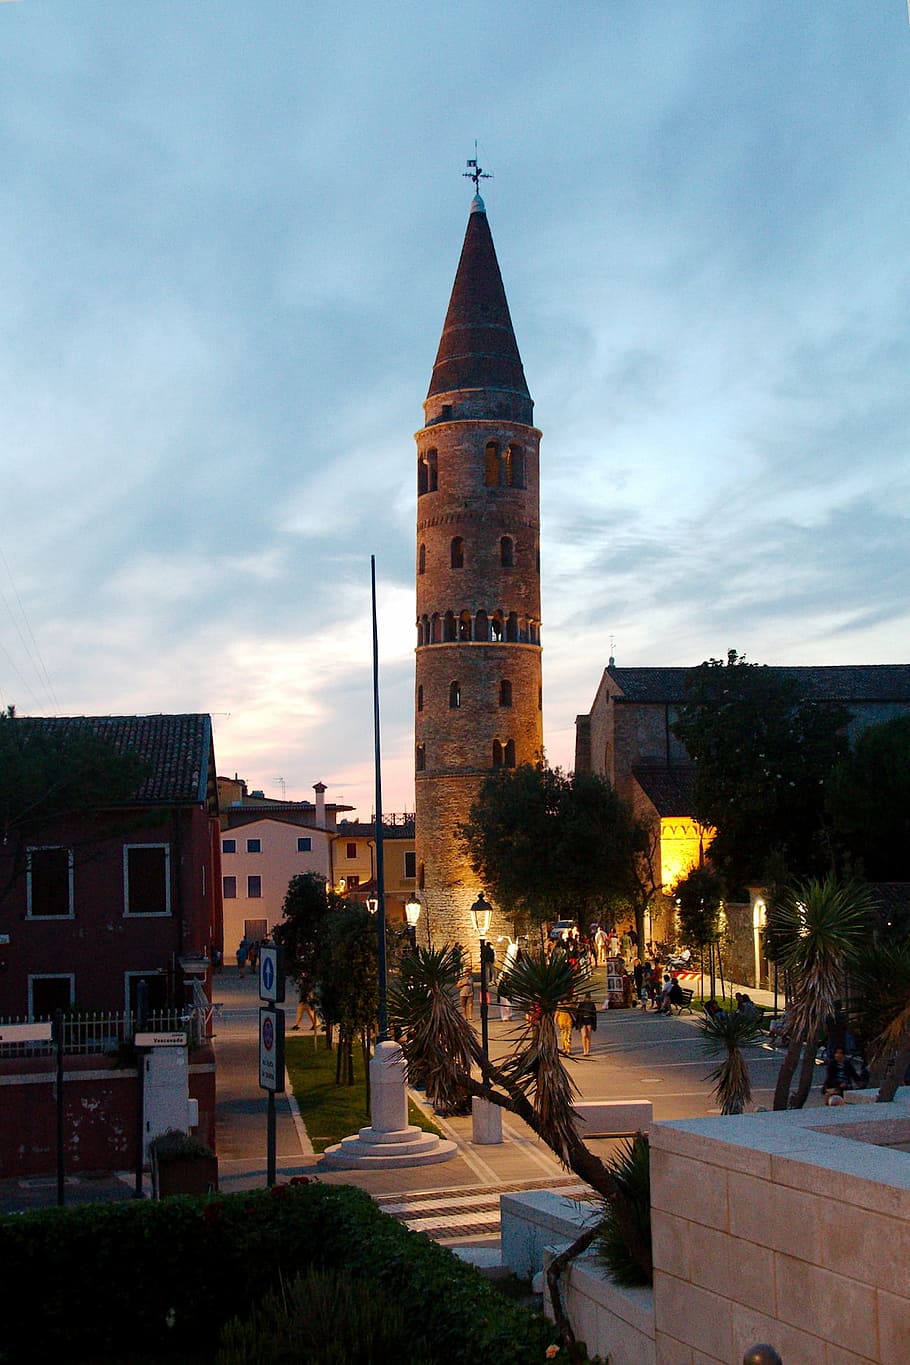 caorle, venice, italy, piazza, church, campanile, architecture, tower, famous Place, building exterior